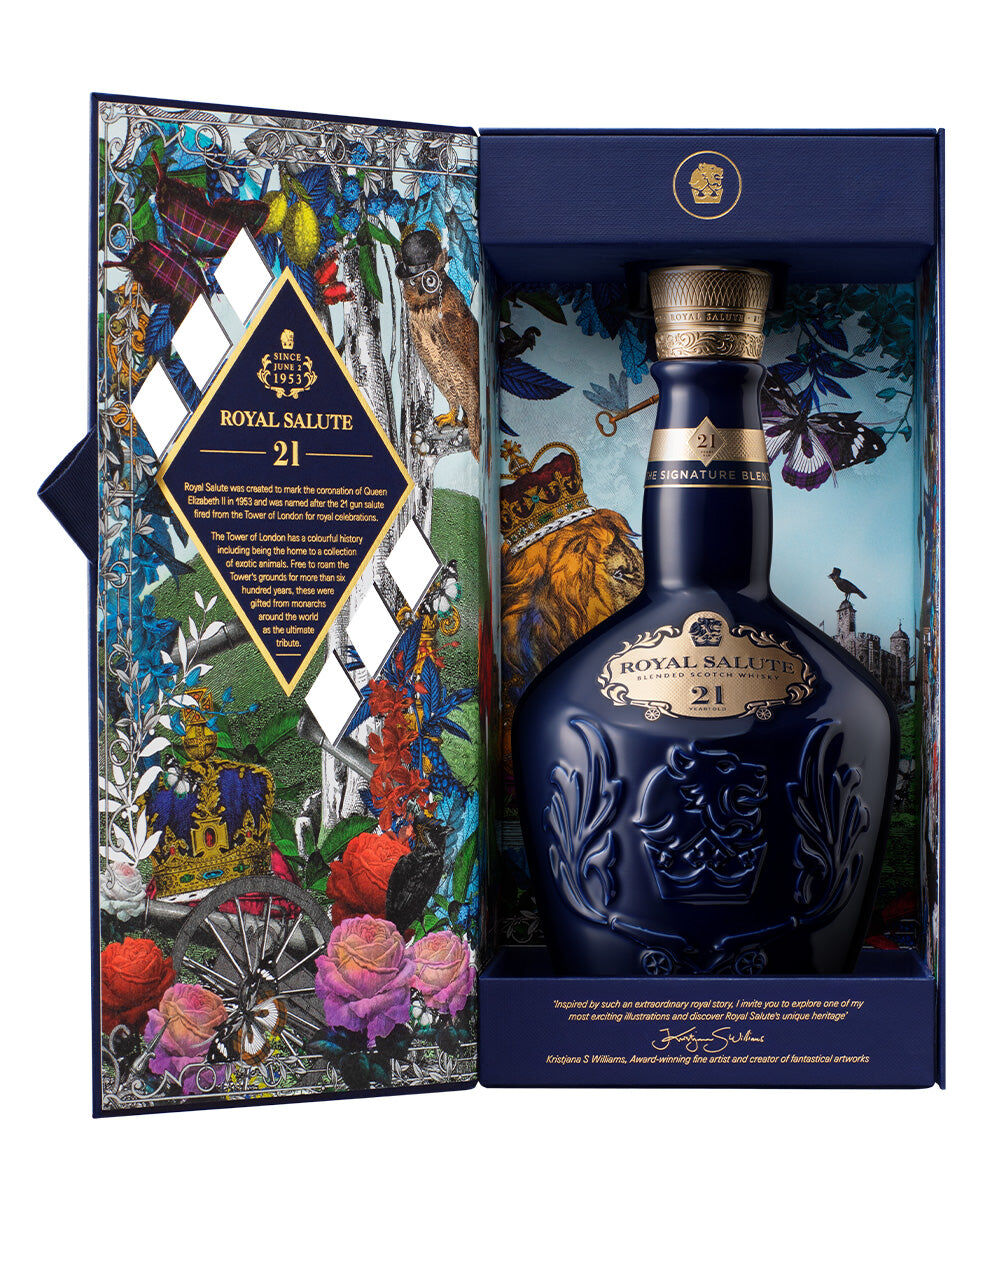 Royal Salute 21 750mL an open blue box with a colorful inside holding a round blue bottle with a golden label and golden top